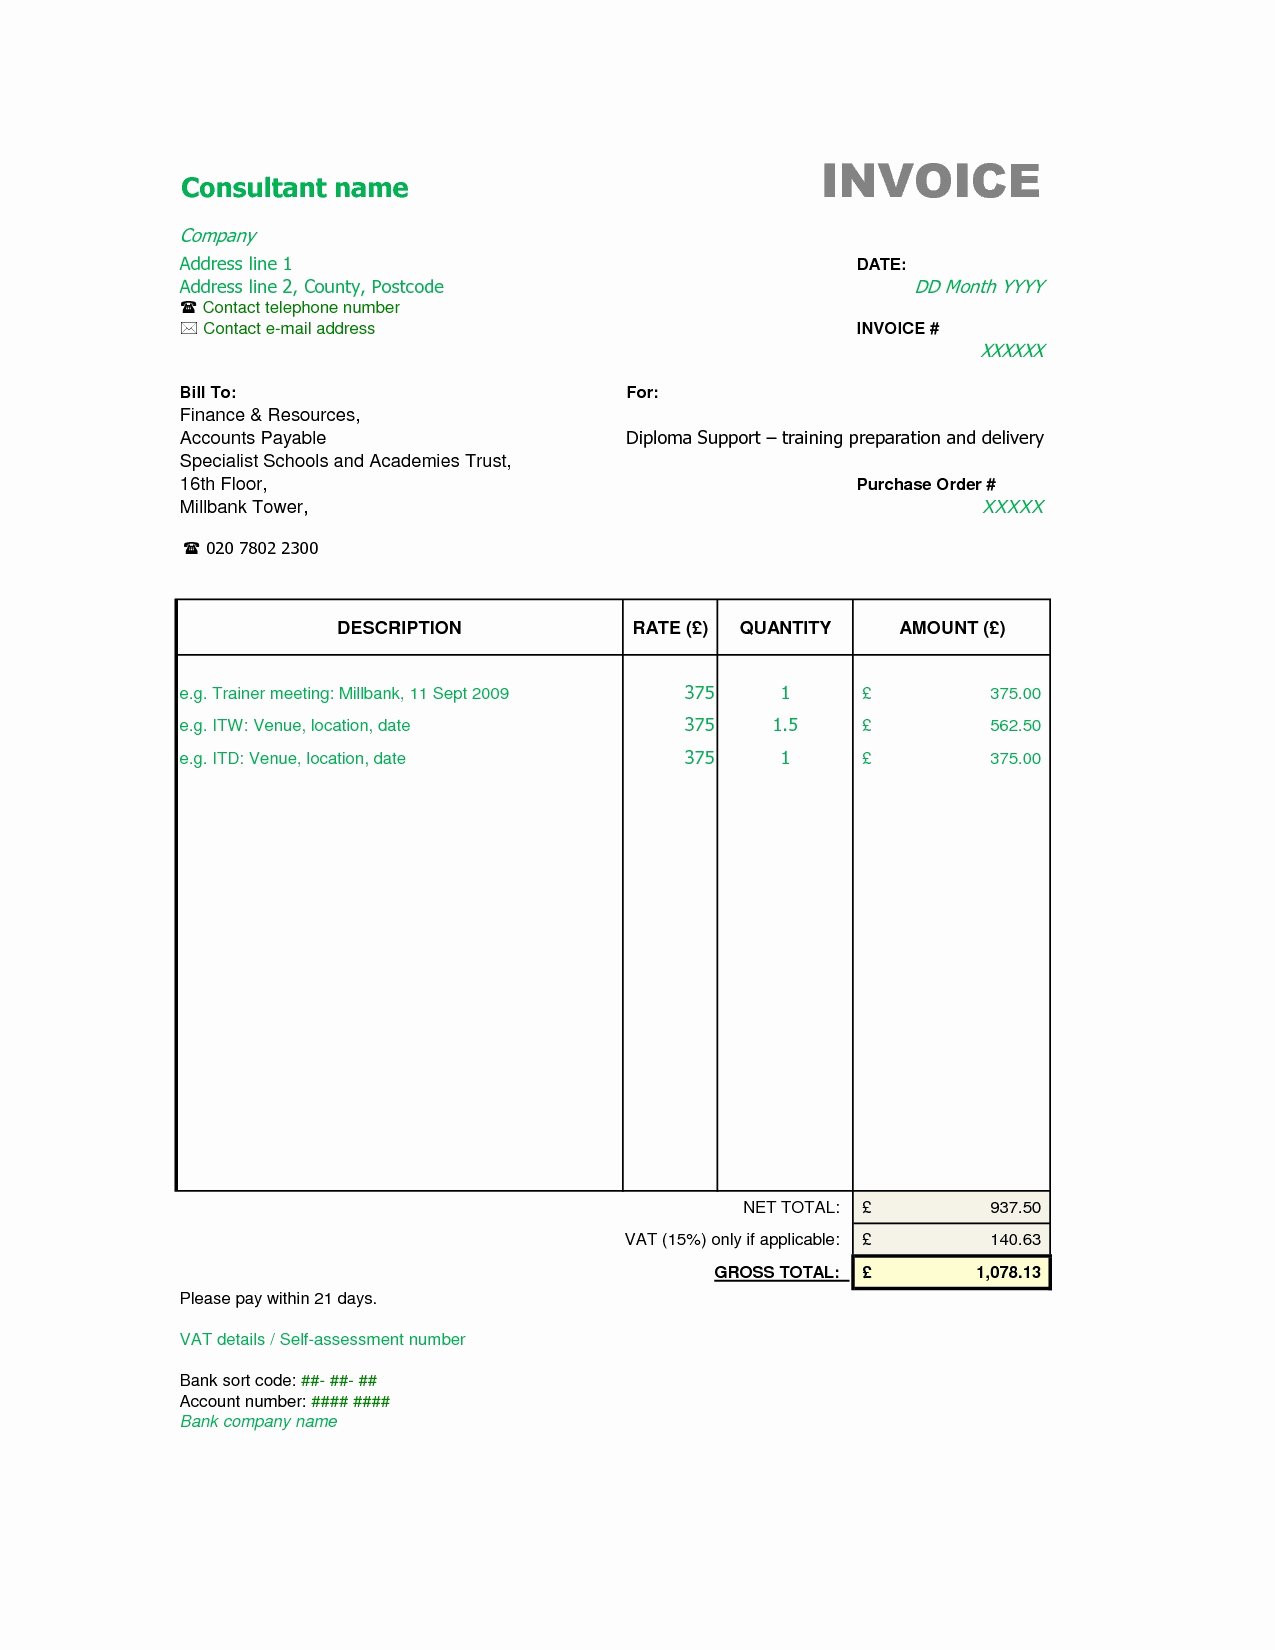 Invoice Template for Consulting Services Awesome Consulting Services Invoice Invoice Template Ideas